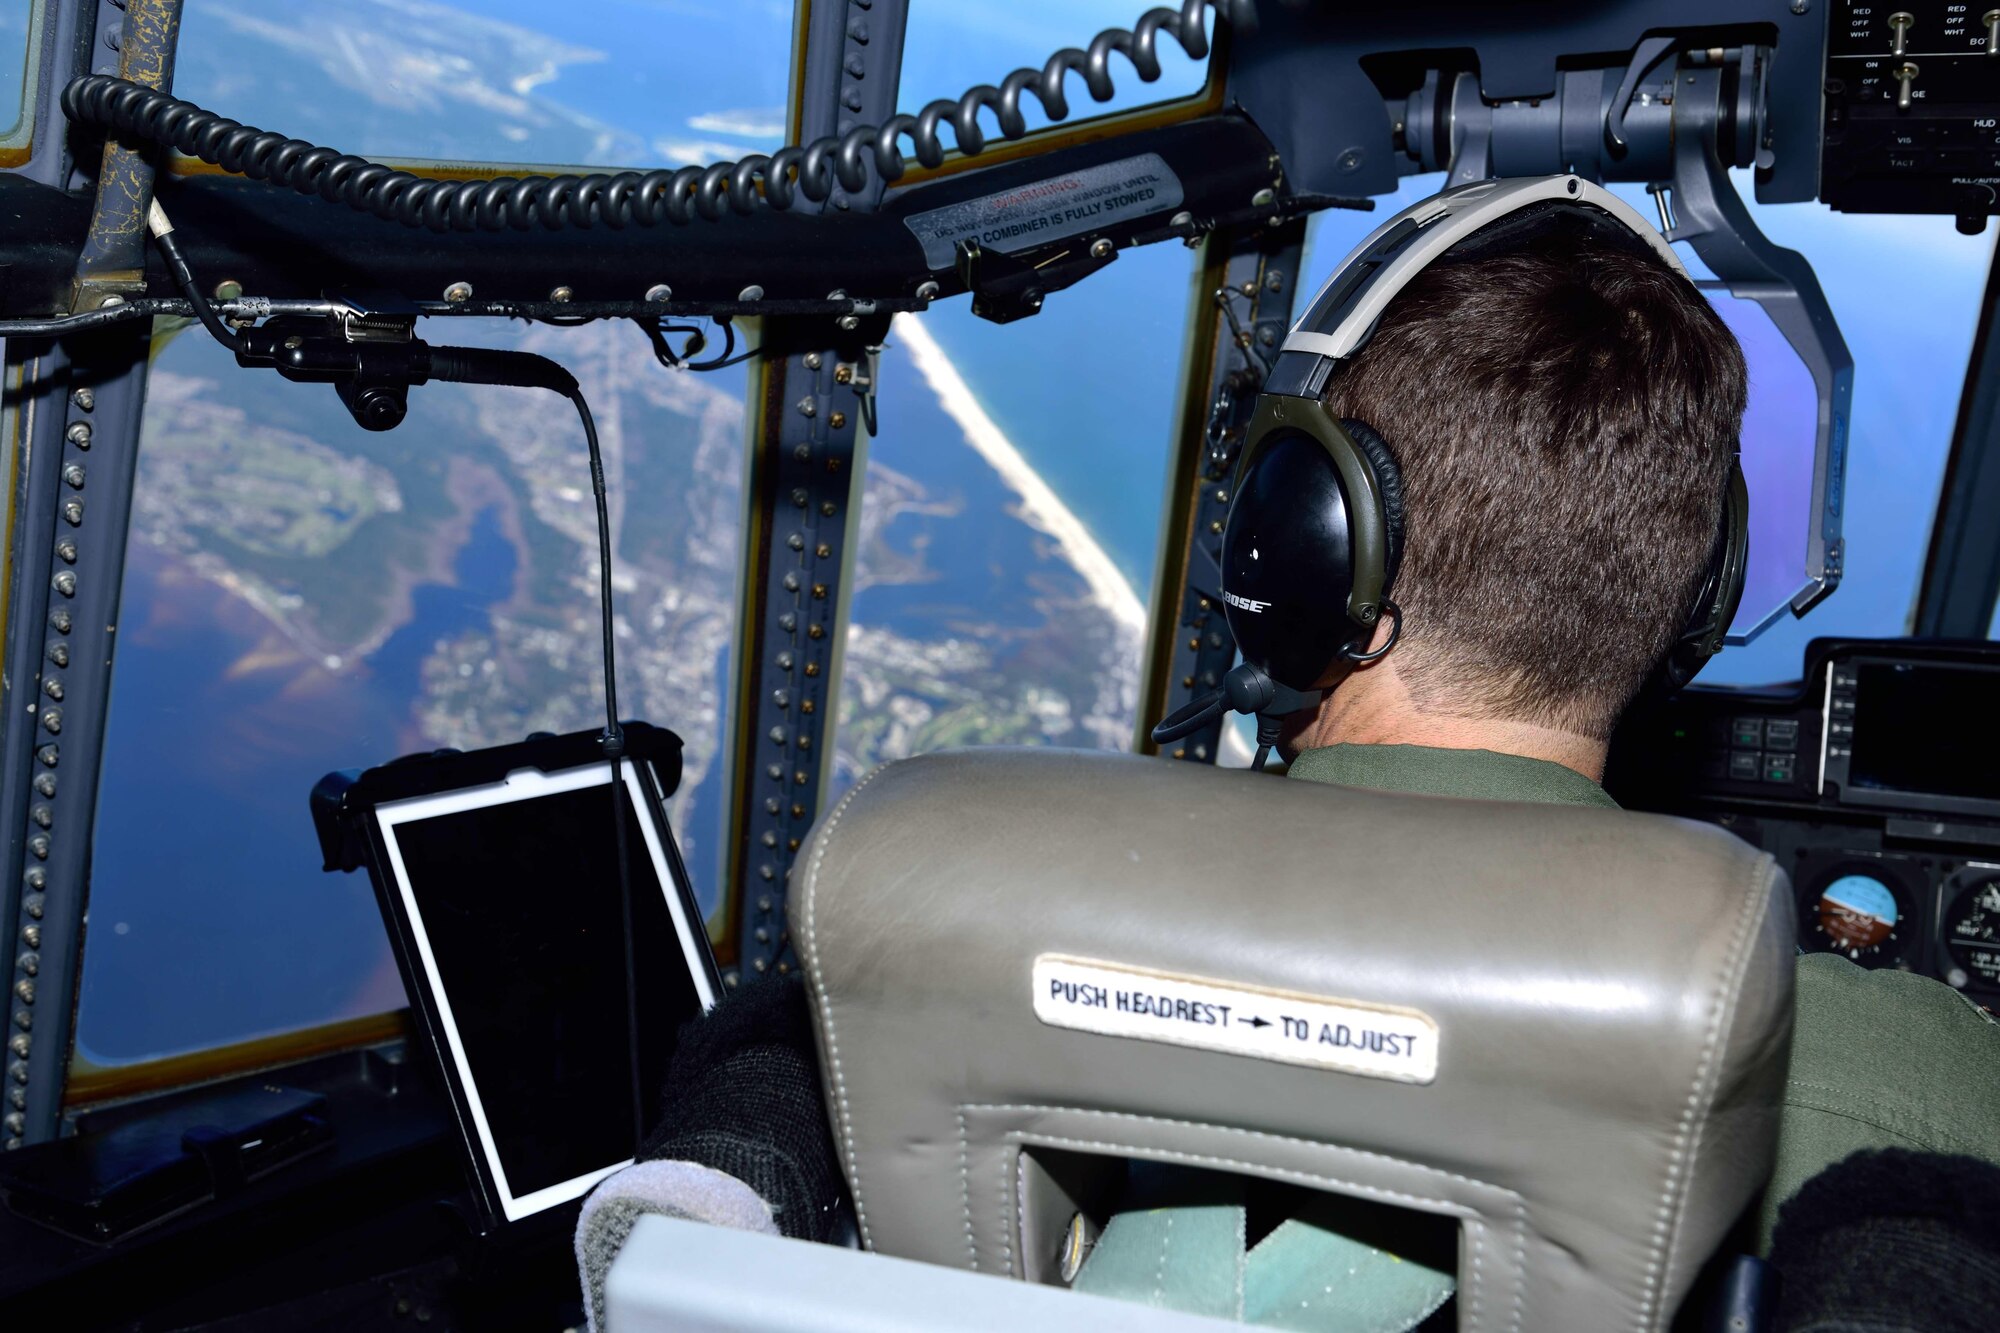 Maj. Kevin Olsen, 815th Airlift Squadron pilot, banks a C-130J Super Hercules aircraft over the U.S. Gulf Coast March 2 during Emerald Warrior 2018. The 815th AS “Flying Jennies” provided airlift support for the special operations joint training event at Hurlburt Field, Florida, Feb. 26-March 2. The exercise involved units from all U.S. military branches, U.S. Special Operations Command and North Atlantic Treaty Organization partner forces.  (U.S. Air Force photo by Tech. Sgt. Ryan Labadens)